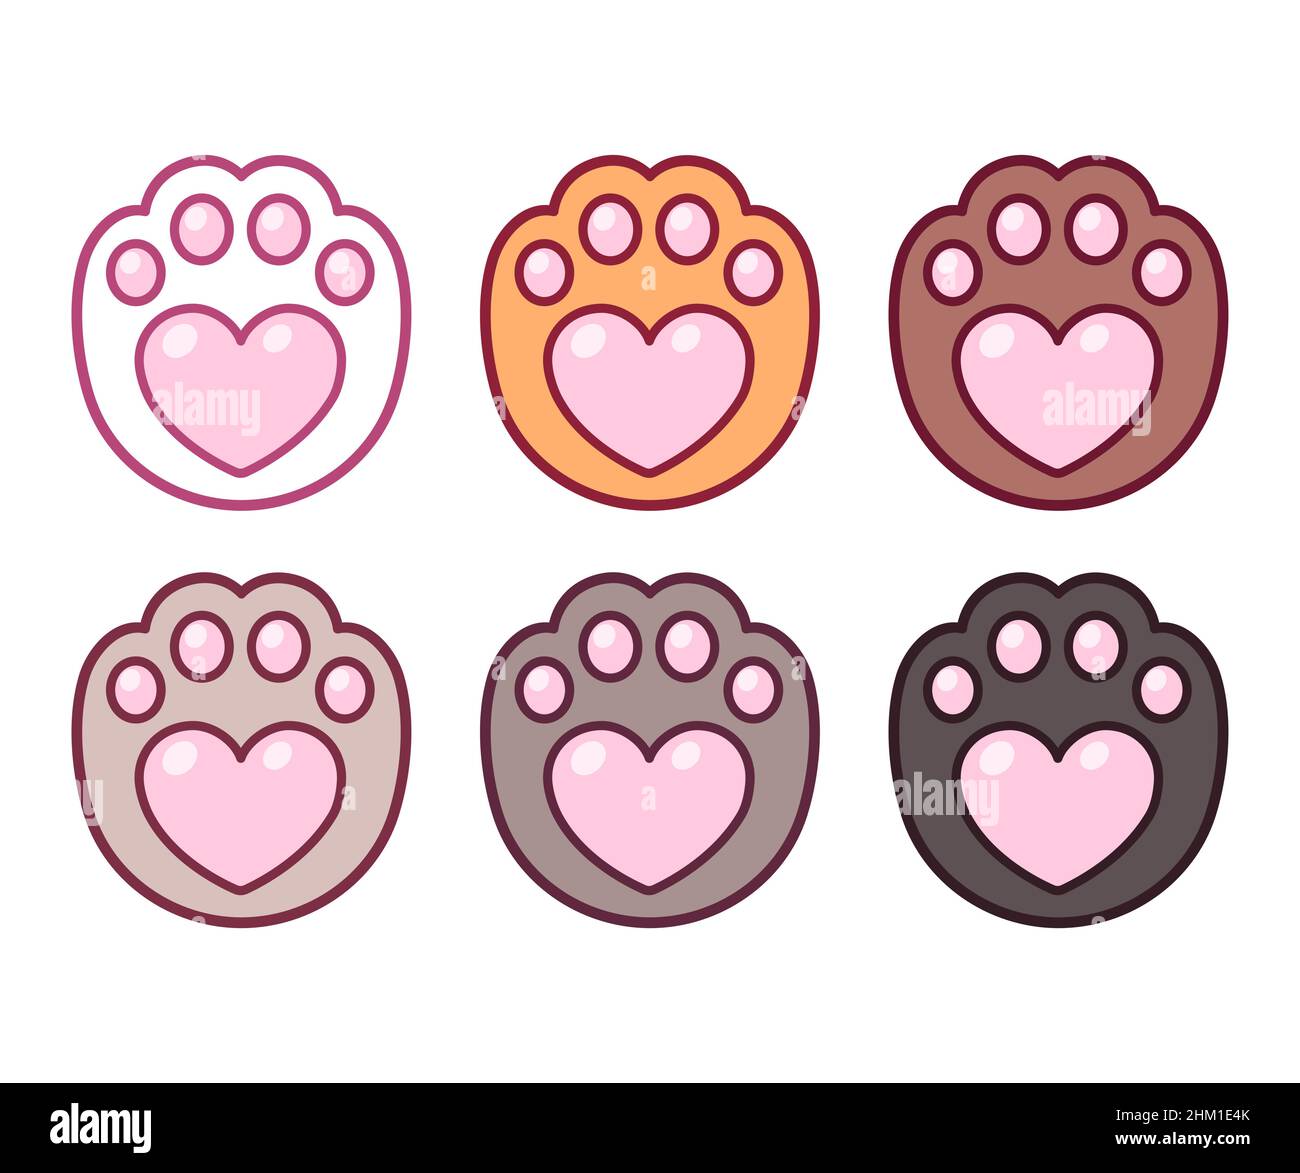 Cartoon heart shaped cat paw prints icon set, different colors. Cute and simple pet love sticker, vector clip art illustration. Stock Vector